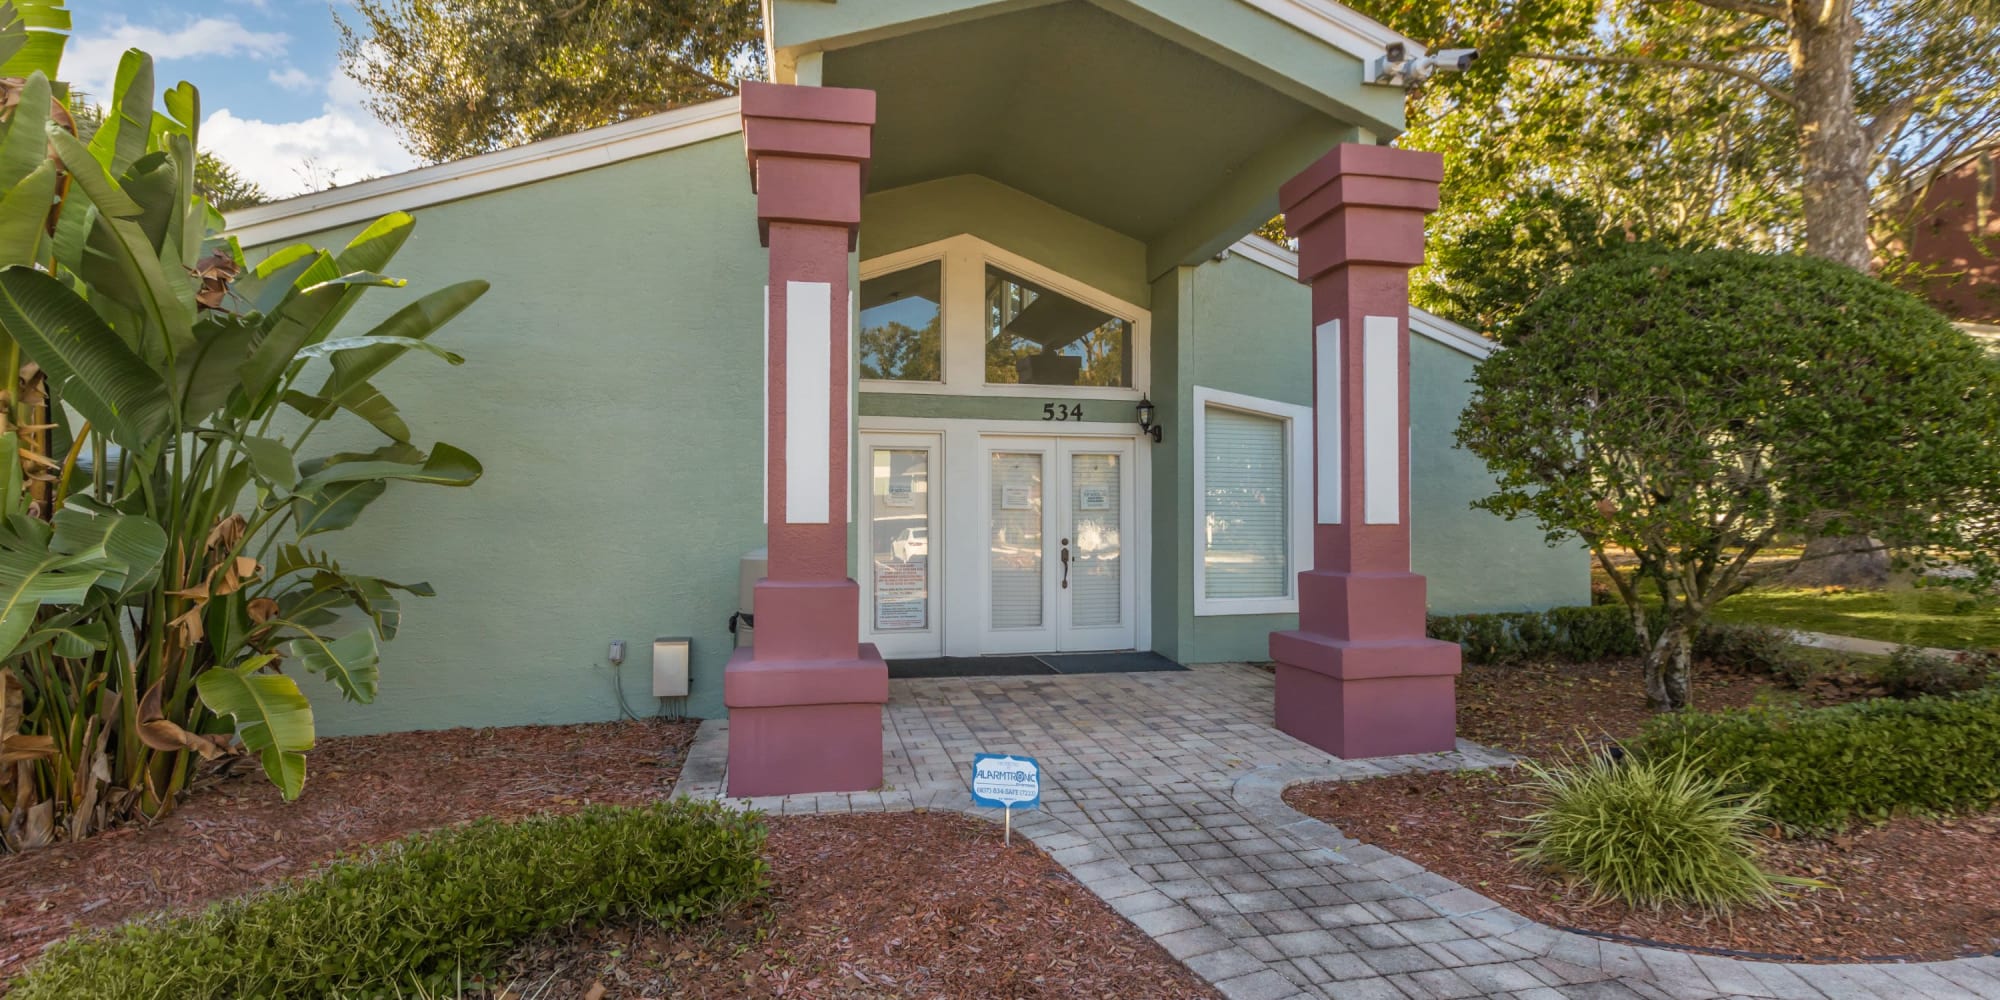 Entrance to the clubhouse at Stone Creek at Wekiva in Altamonte Springs, Florida